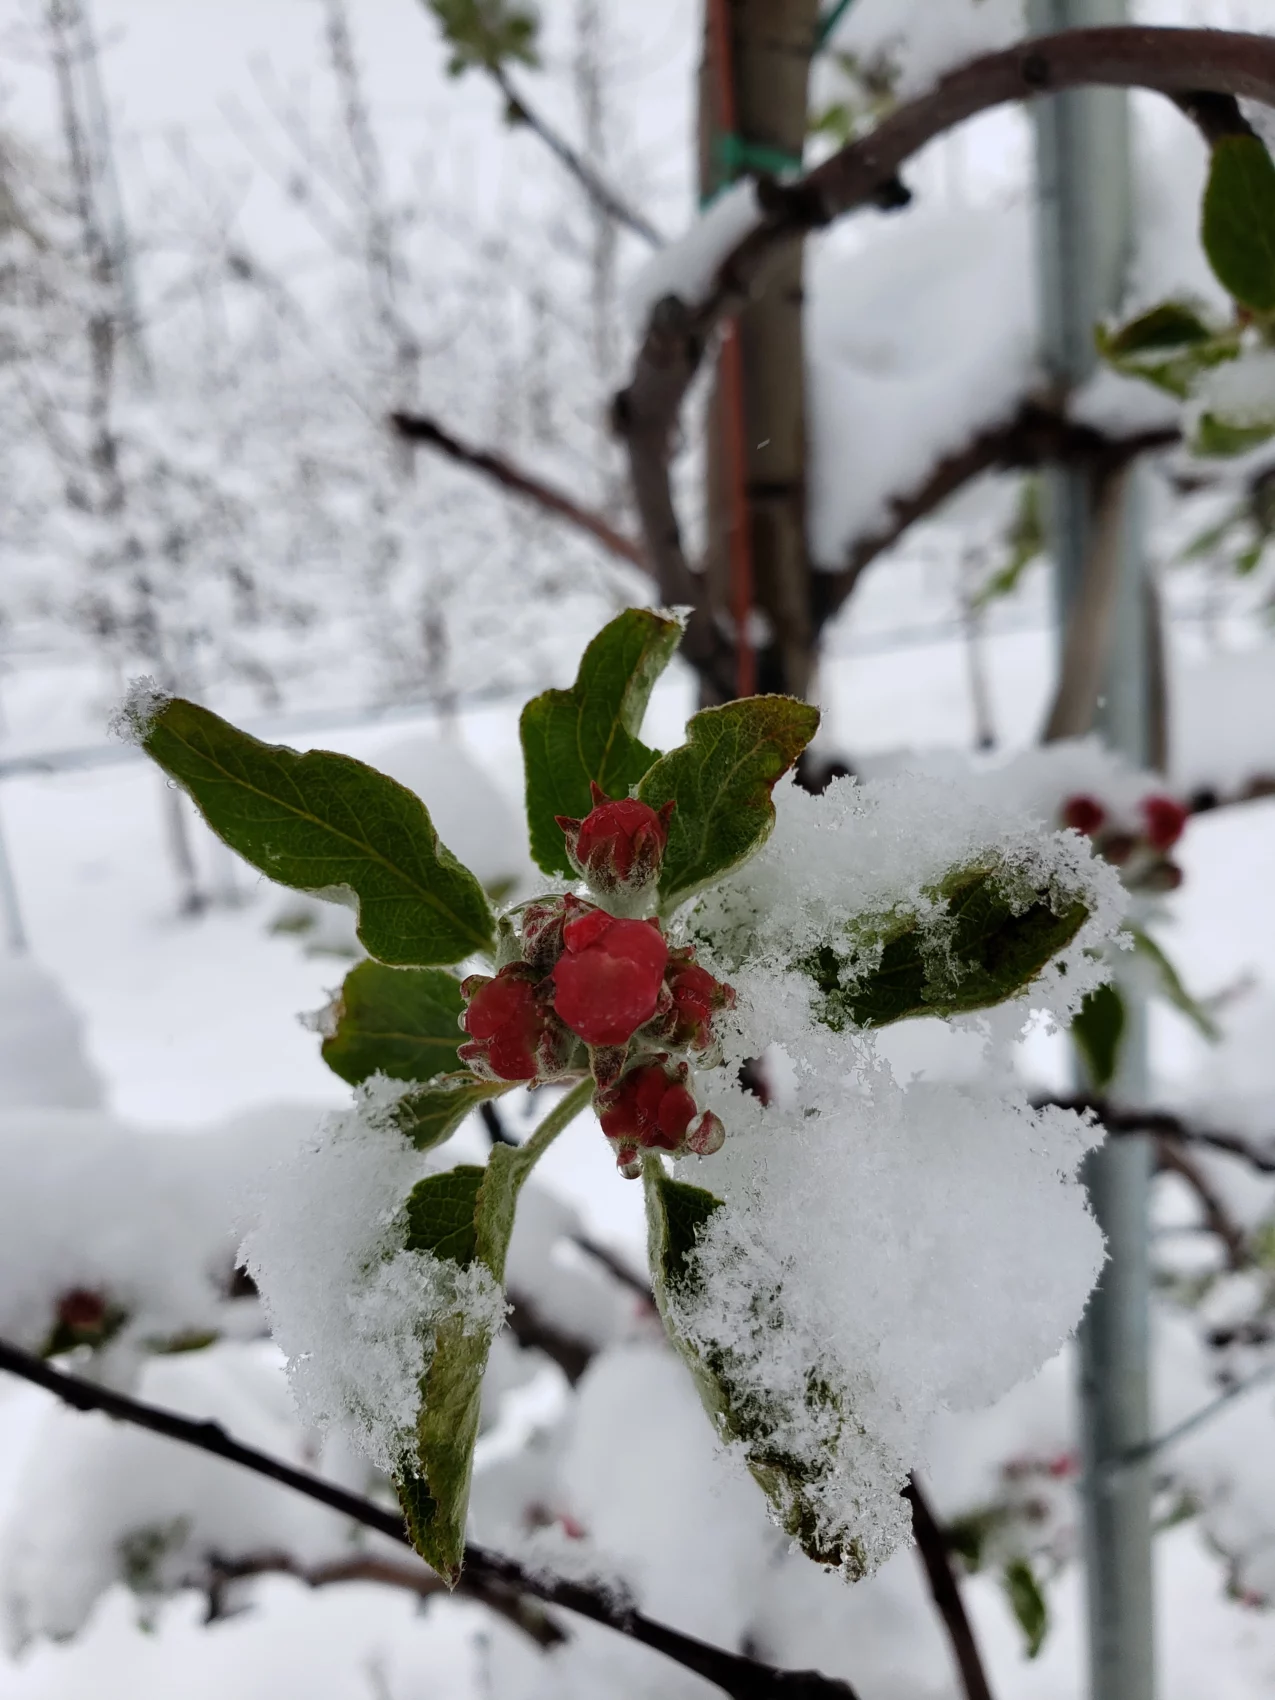 Apple bud covered in snow